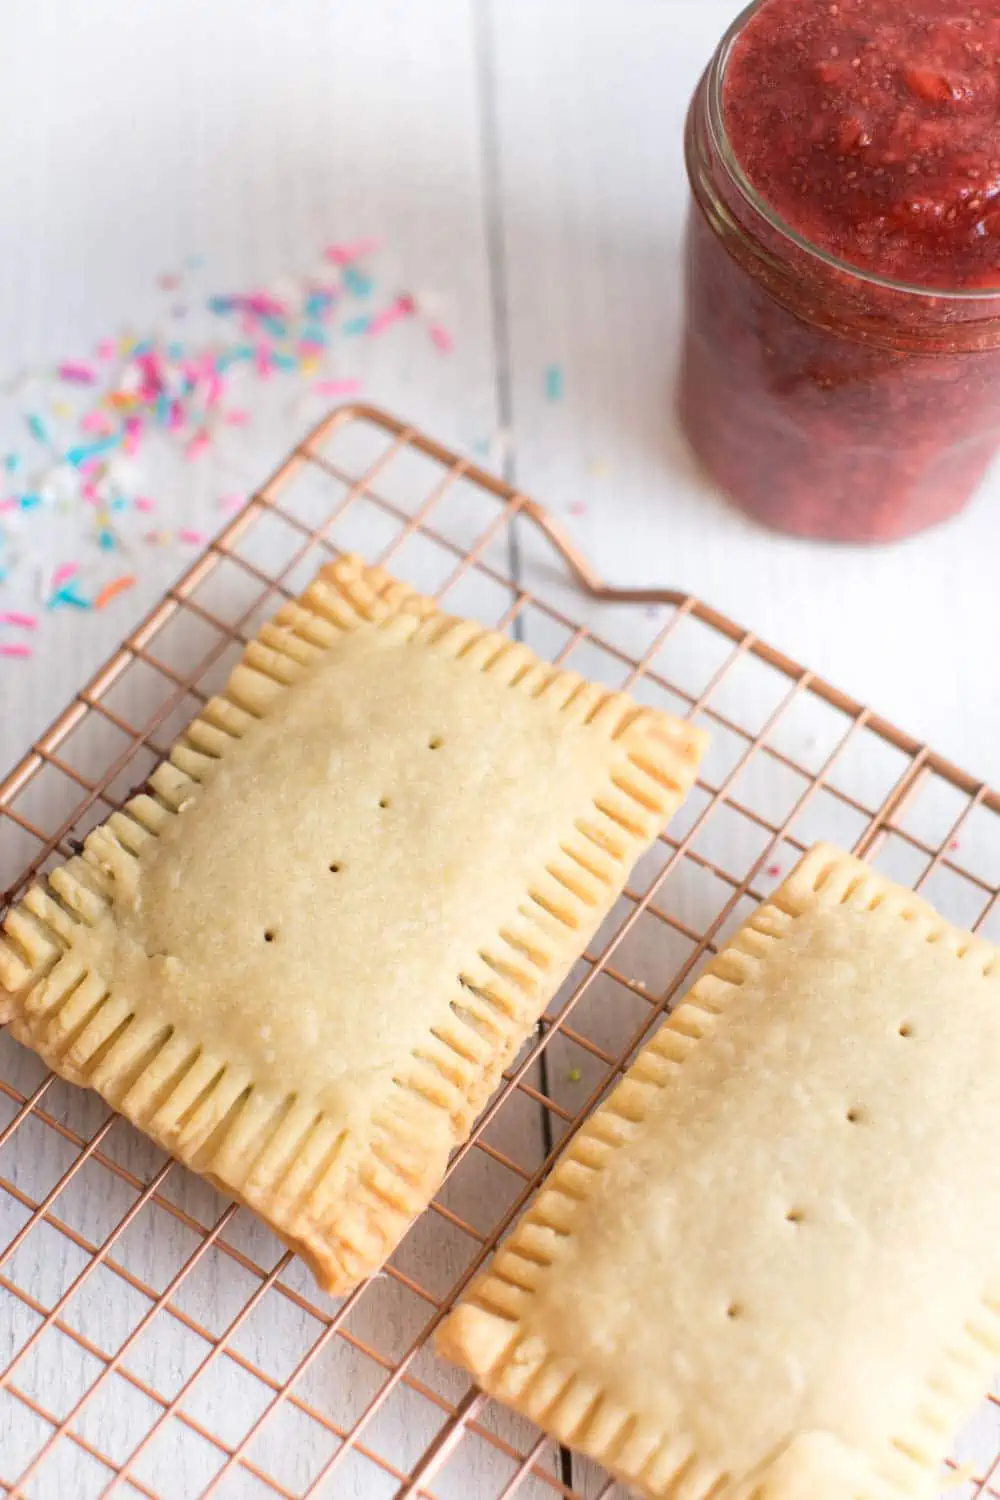 Bare Baked Vegan Pop Tarts Before Being Frosted